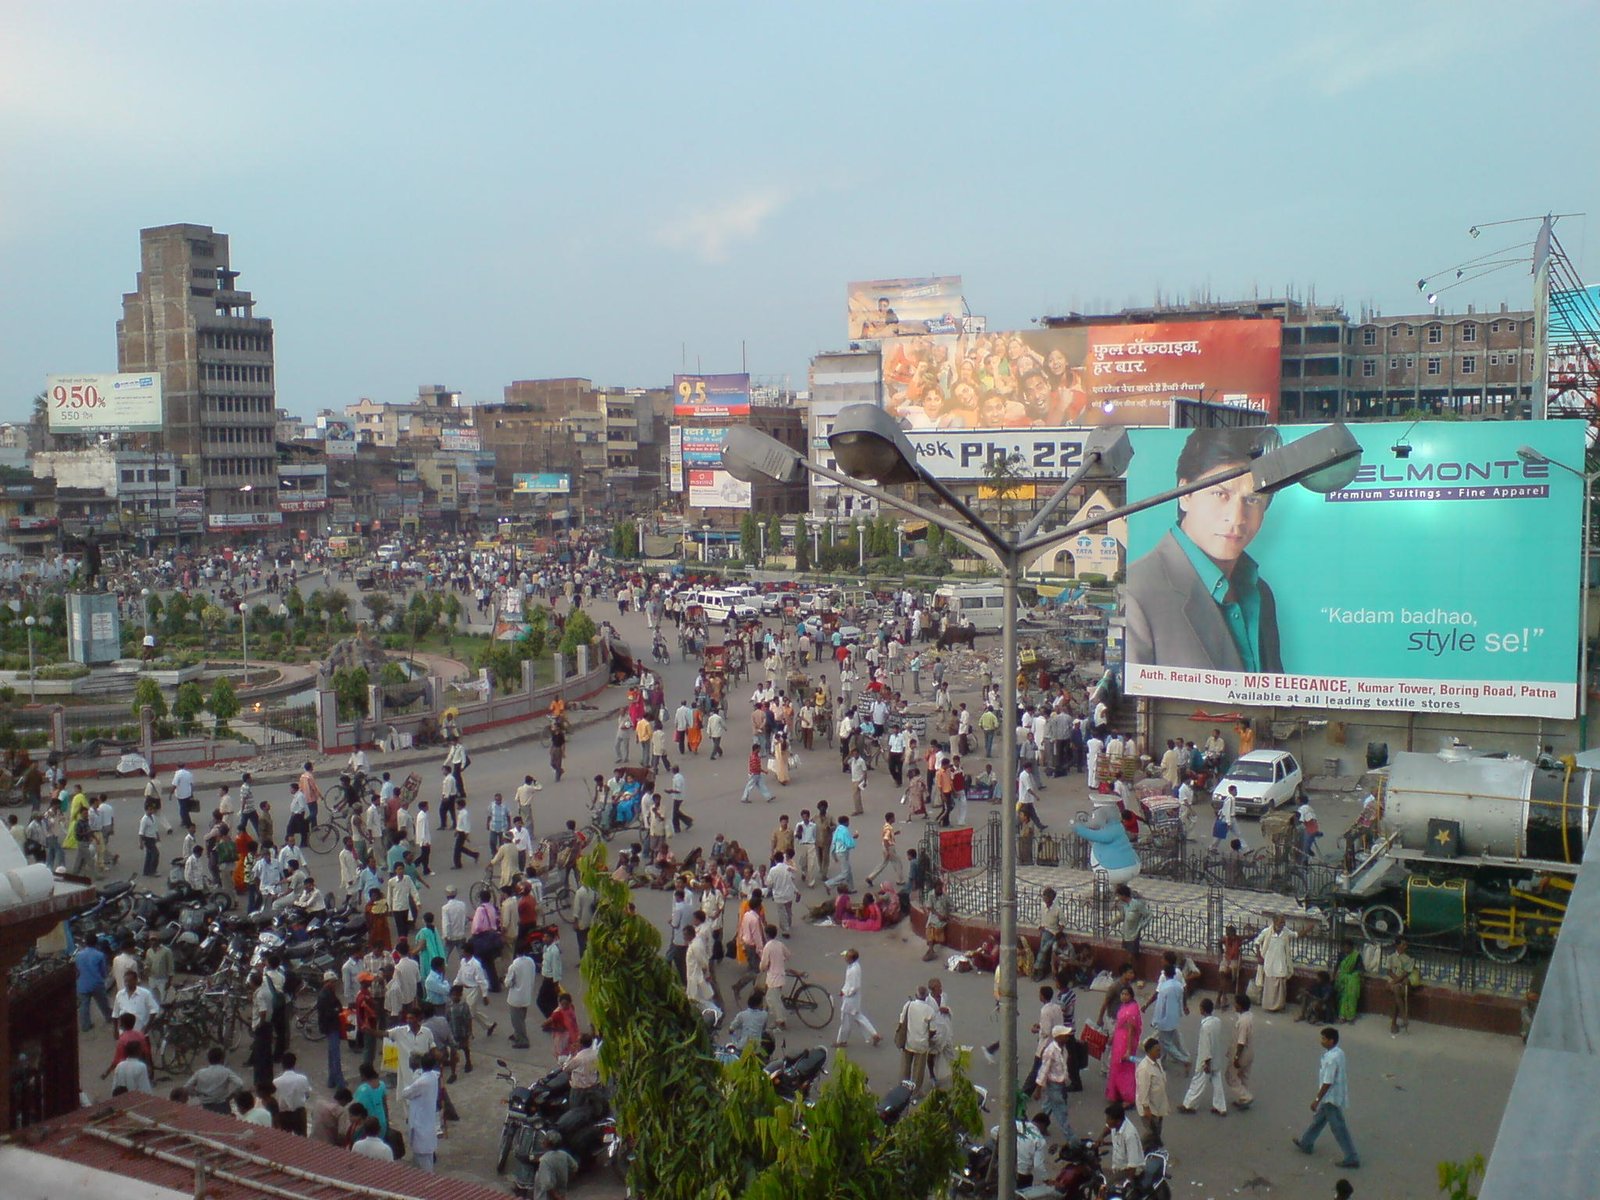 Patna Pictures - Latest Patna Travel Photos, HD Travel Images